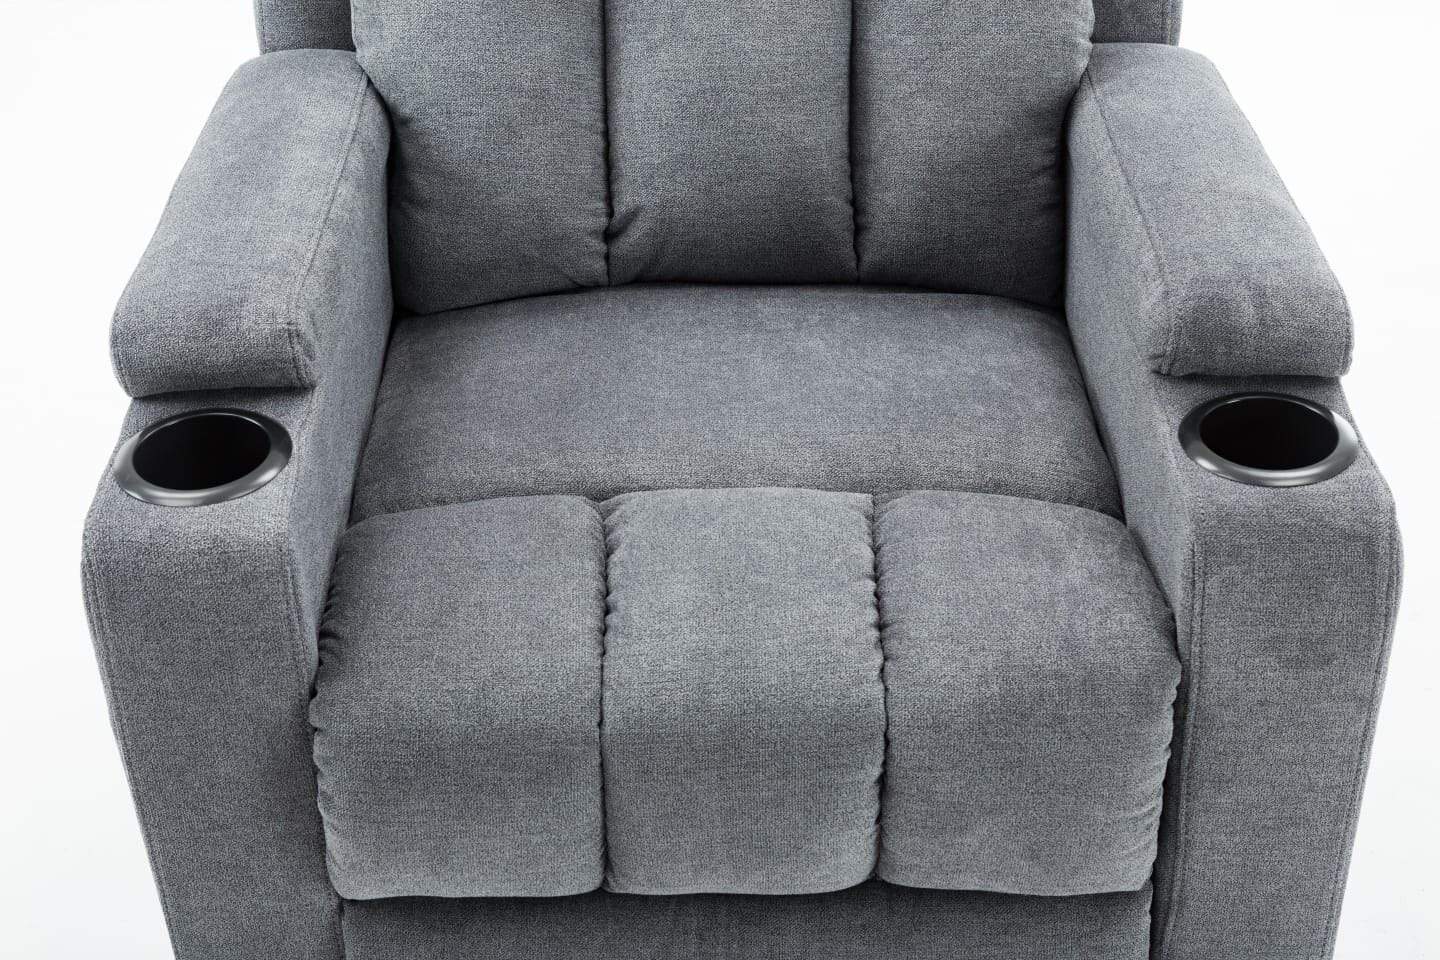 Lazy Recliner Arm Chair With Cupholders